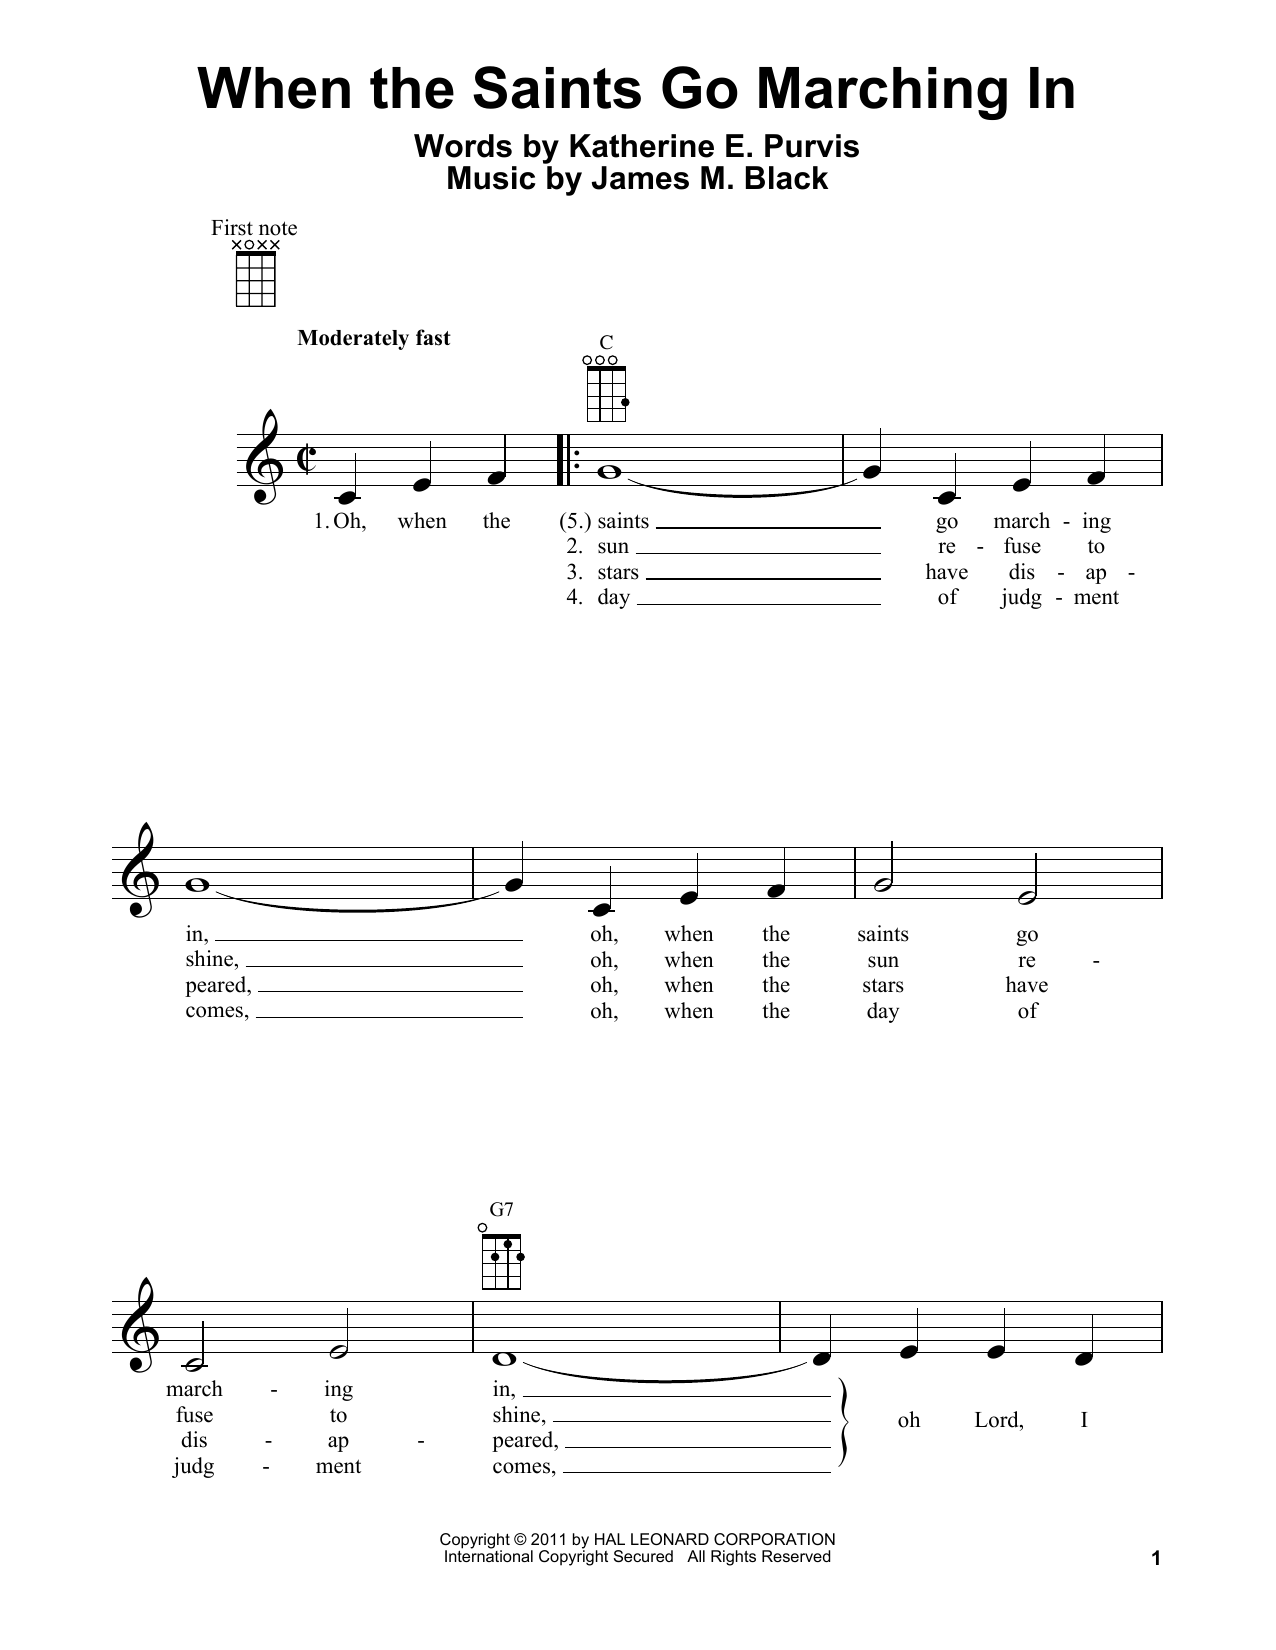 Download Traditional When The Saints Go Marching In Sheet Music